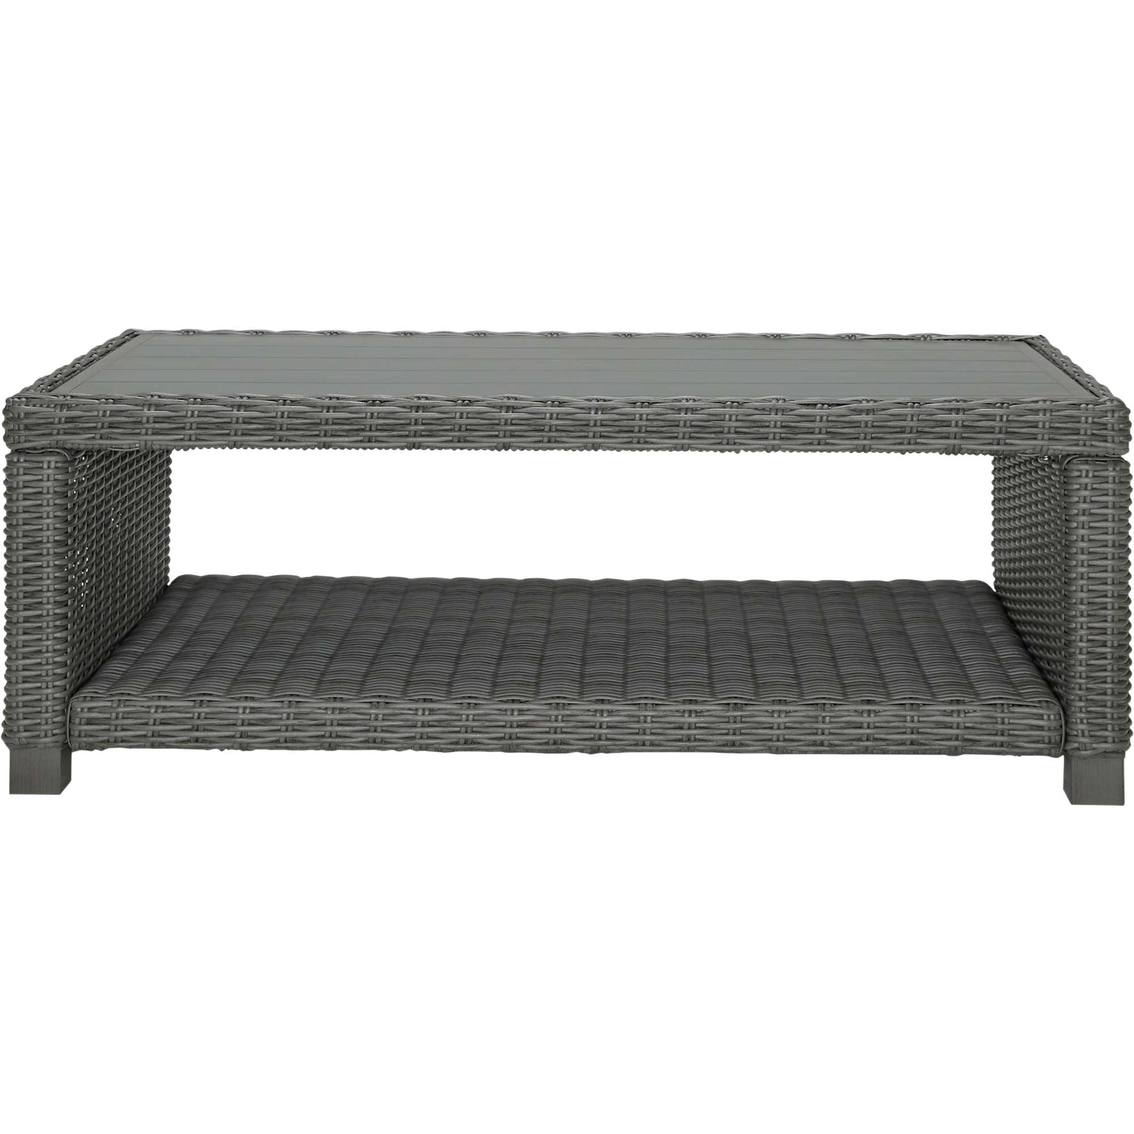 Signature Design by Ashley Elite Park Outdoor Coffee Table - Image 2 of 7